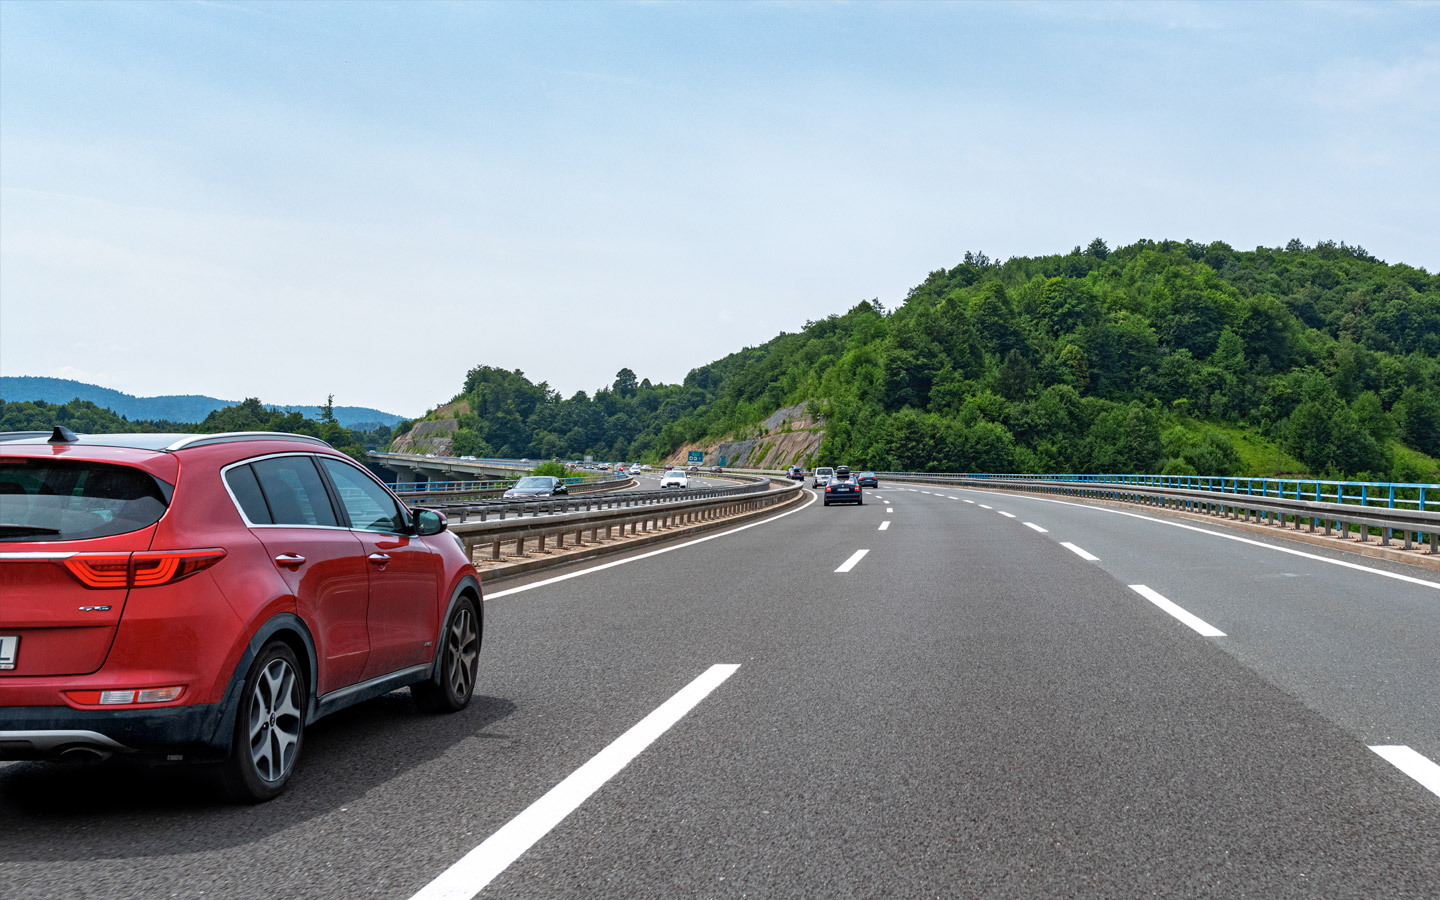 Kia Highway Driving Assist 2 is a driver assistance feature